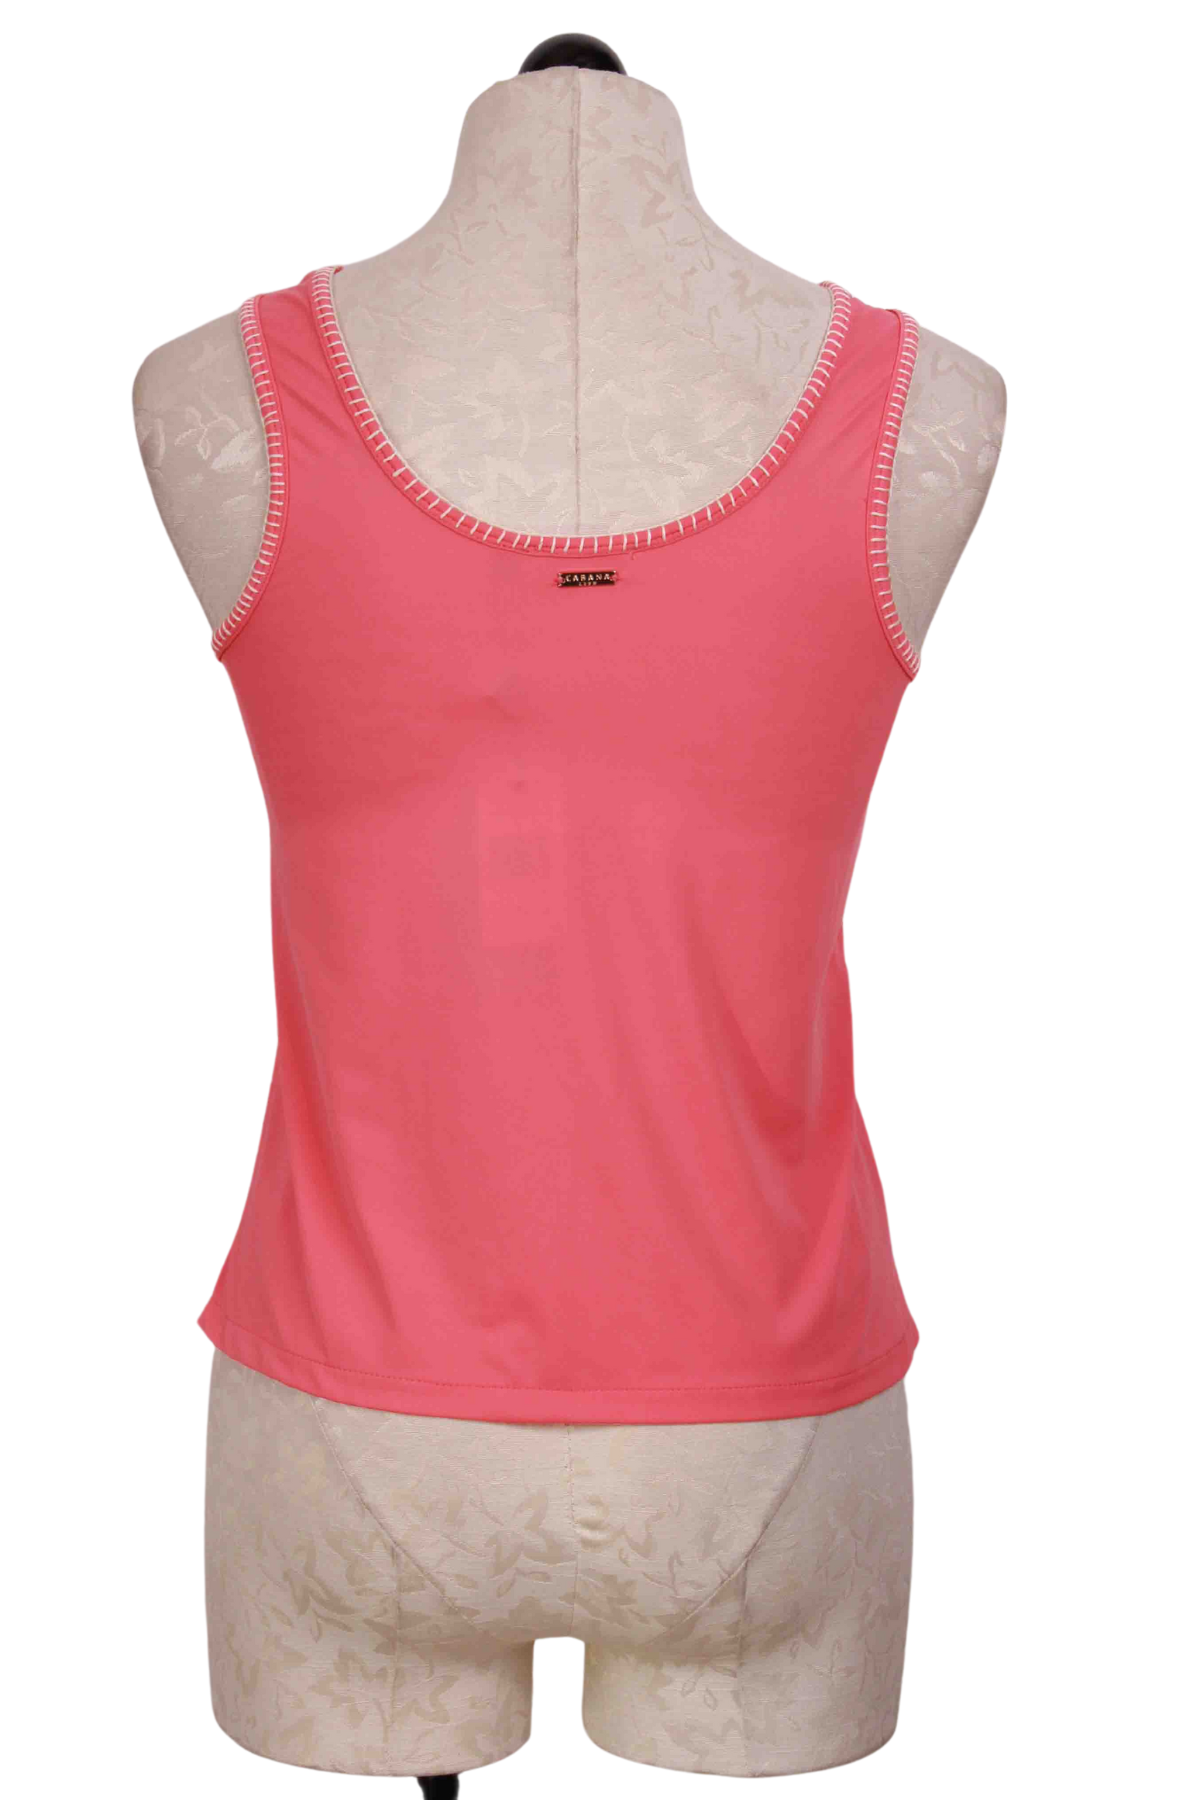 back view of Coral Whipstitch Tank Top by Cabana Life